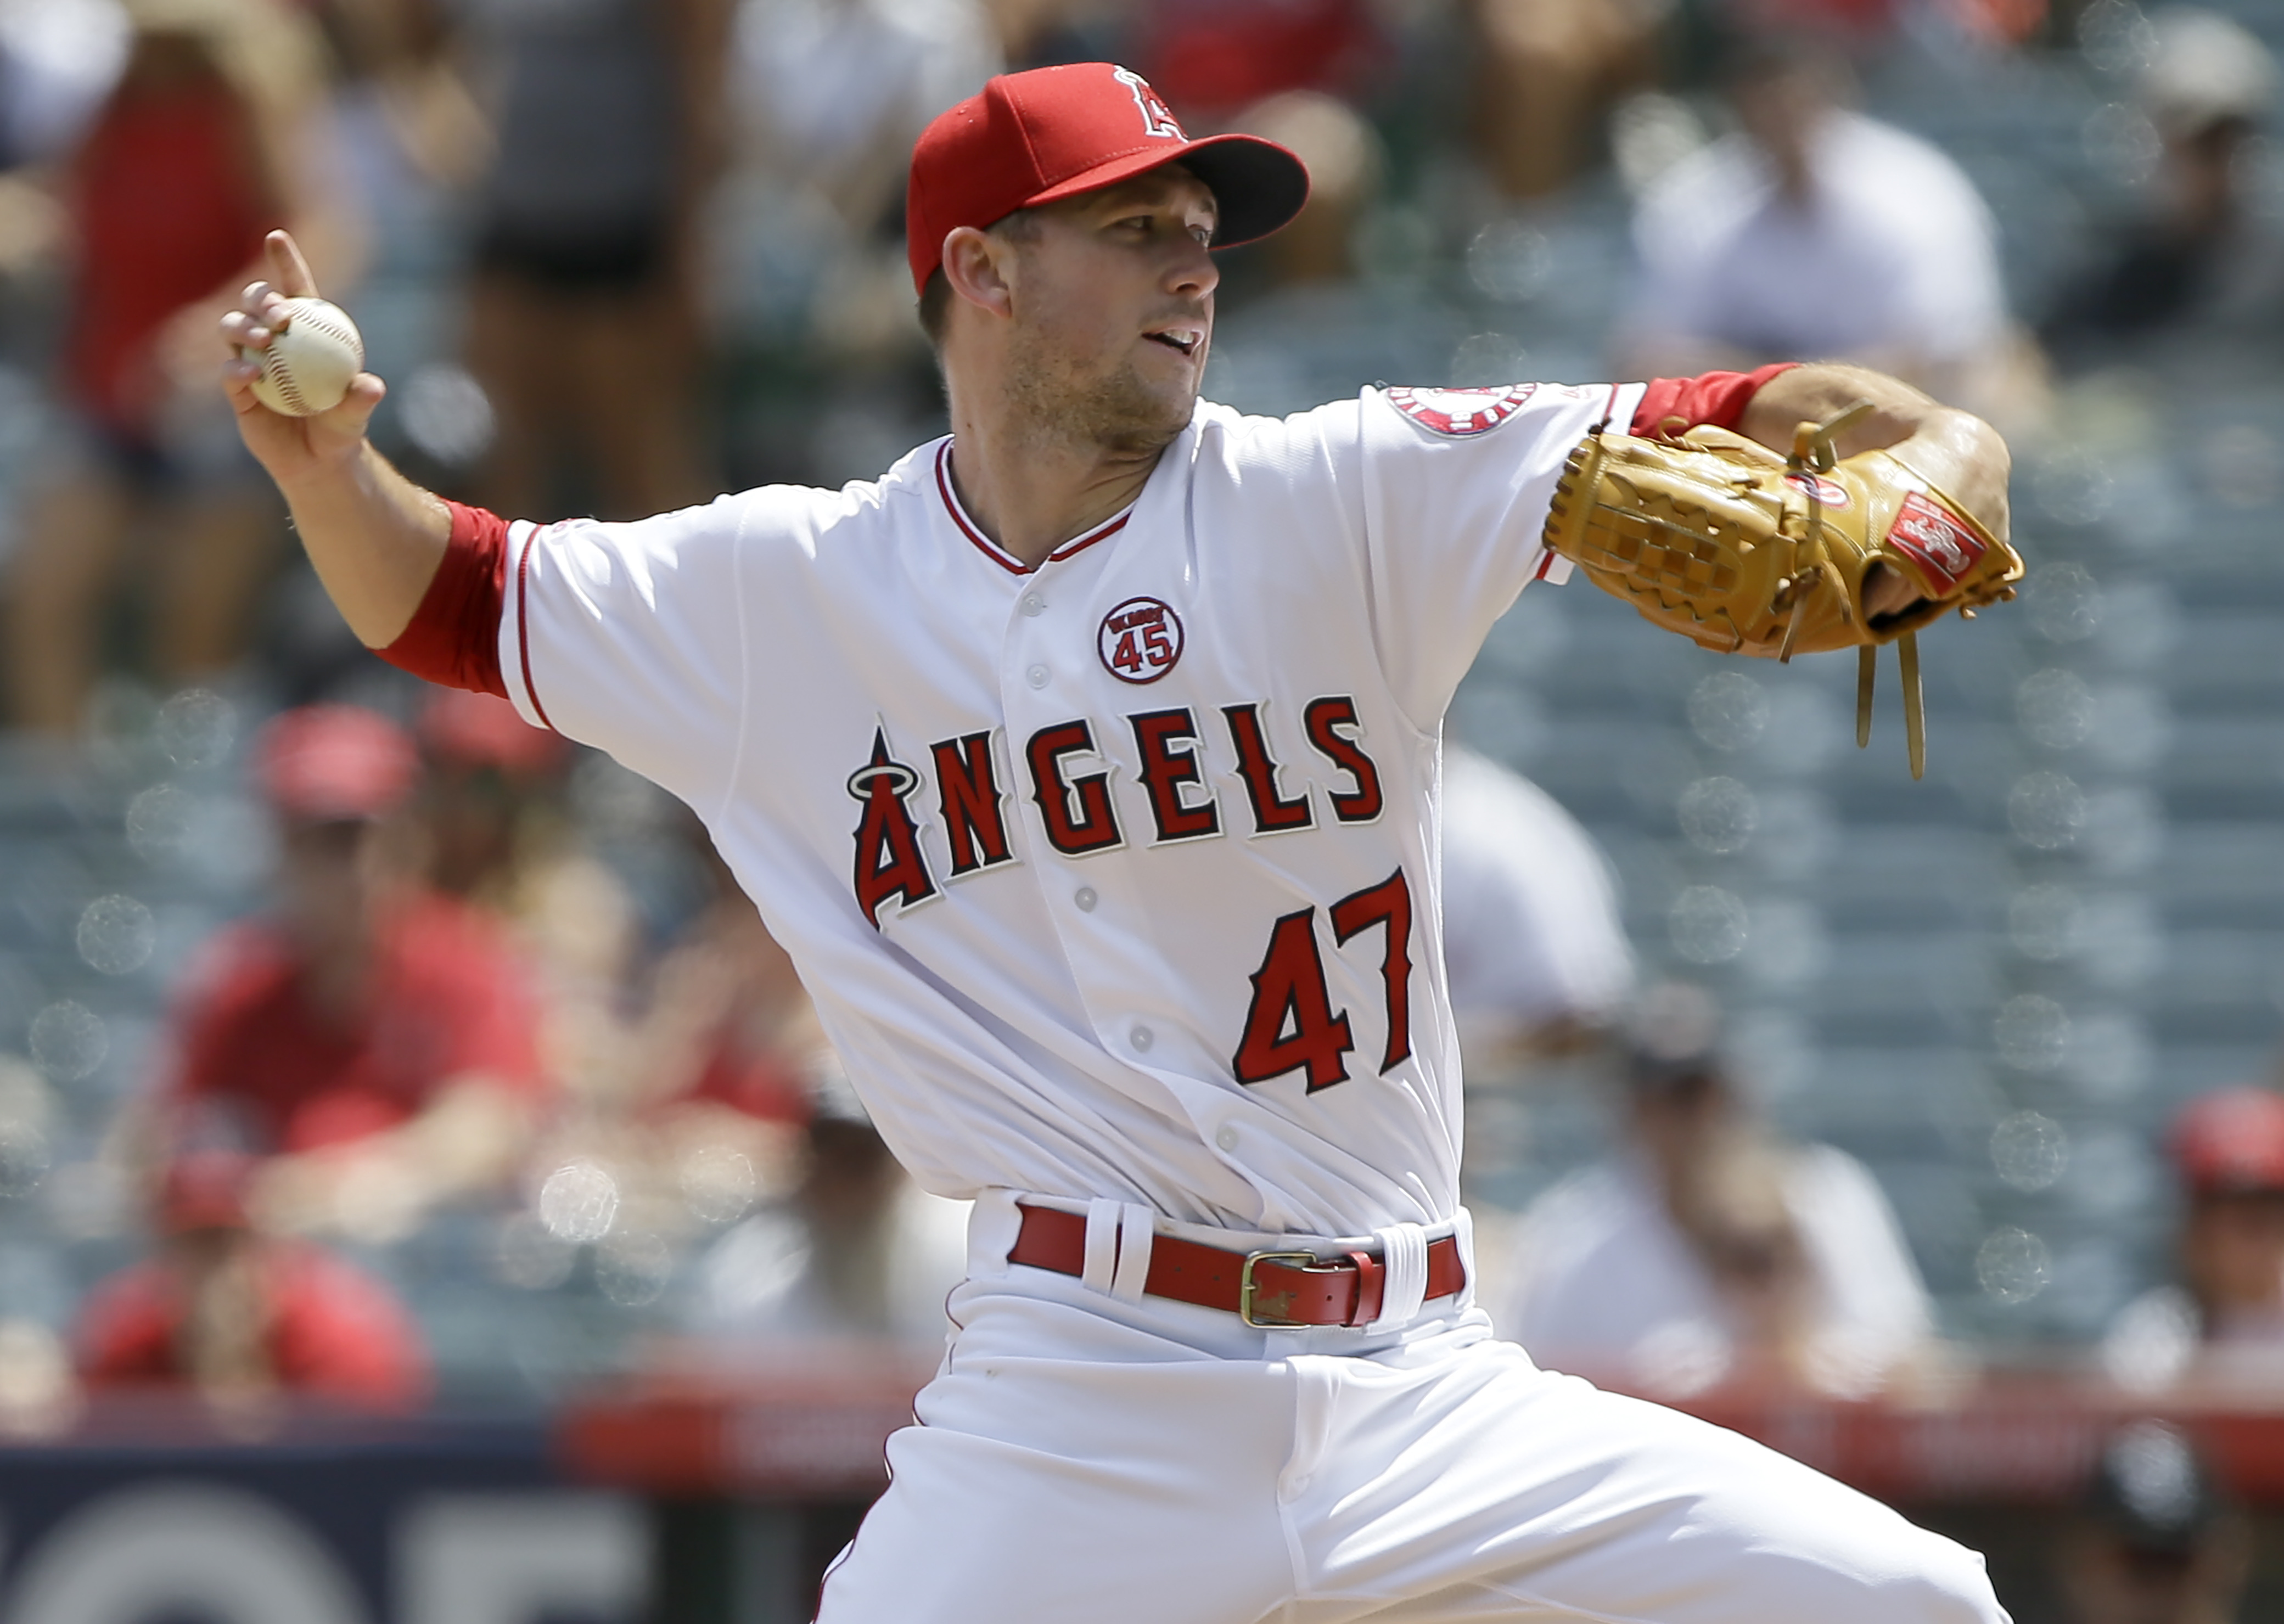 Griffin Canning's third time through the batting order is charming in Angels' win 